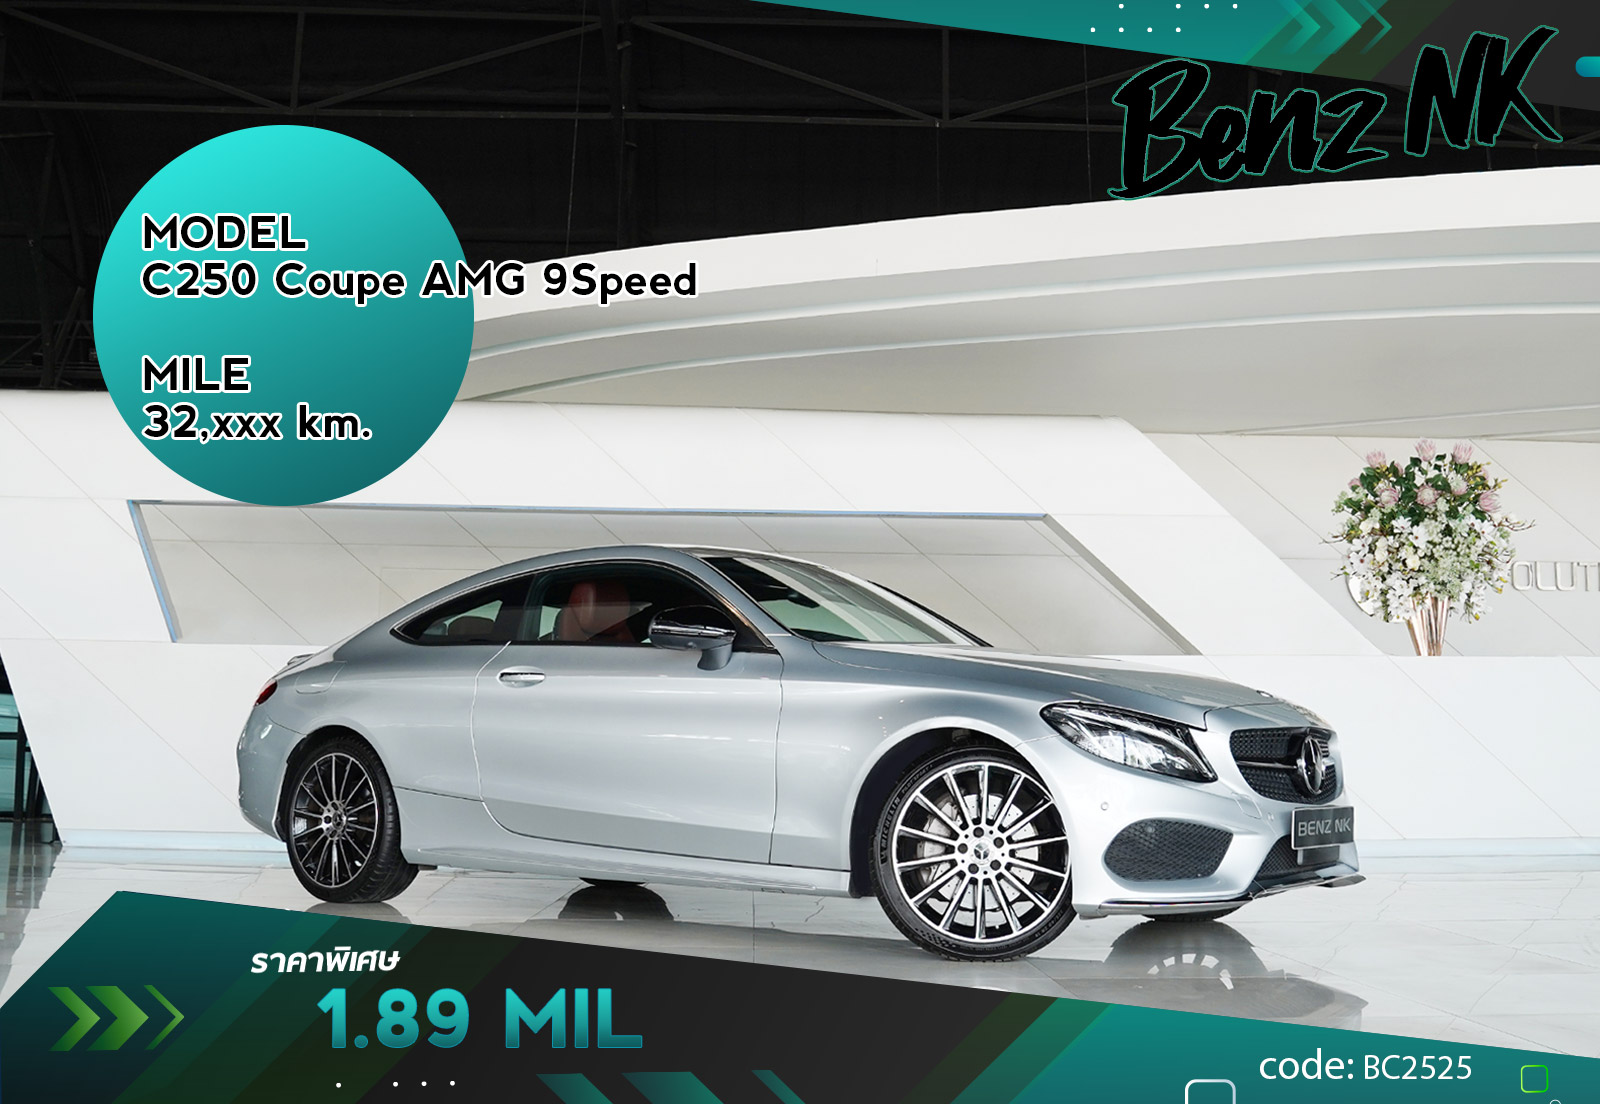 C250 Coupe AMG 9Speed